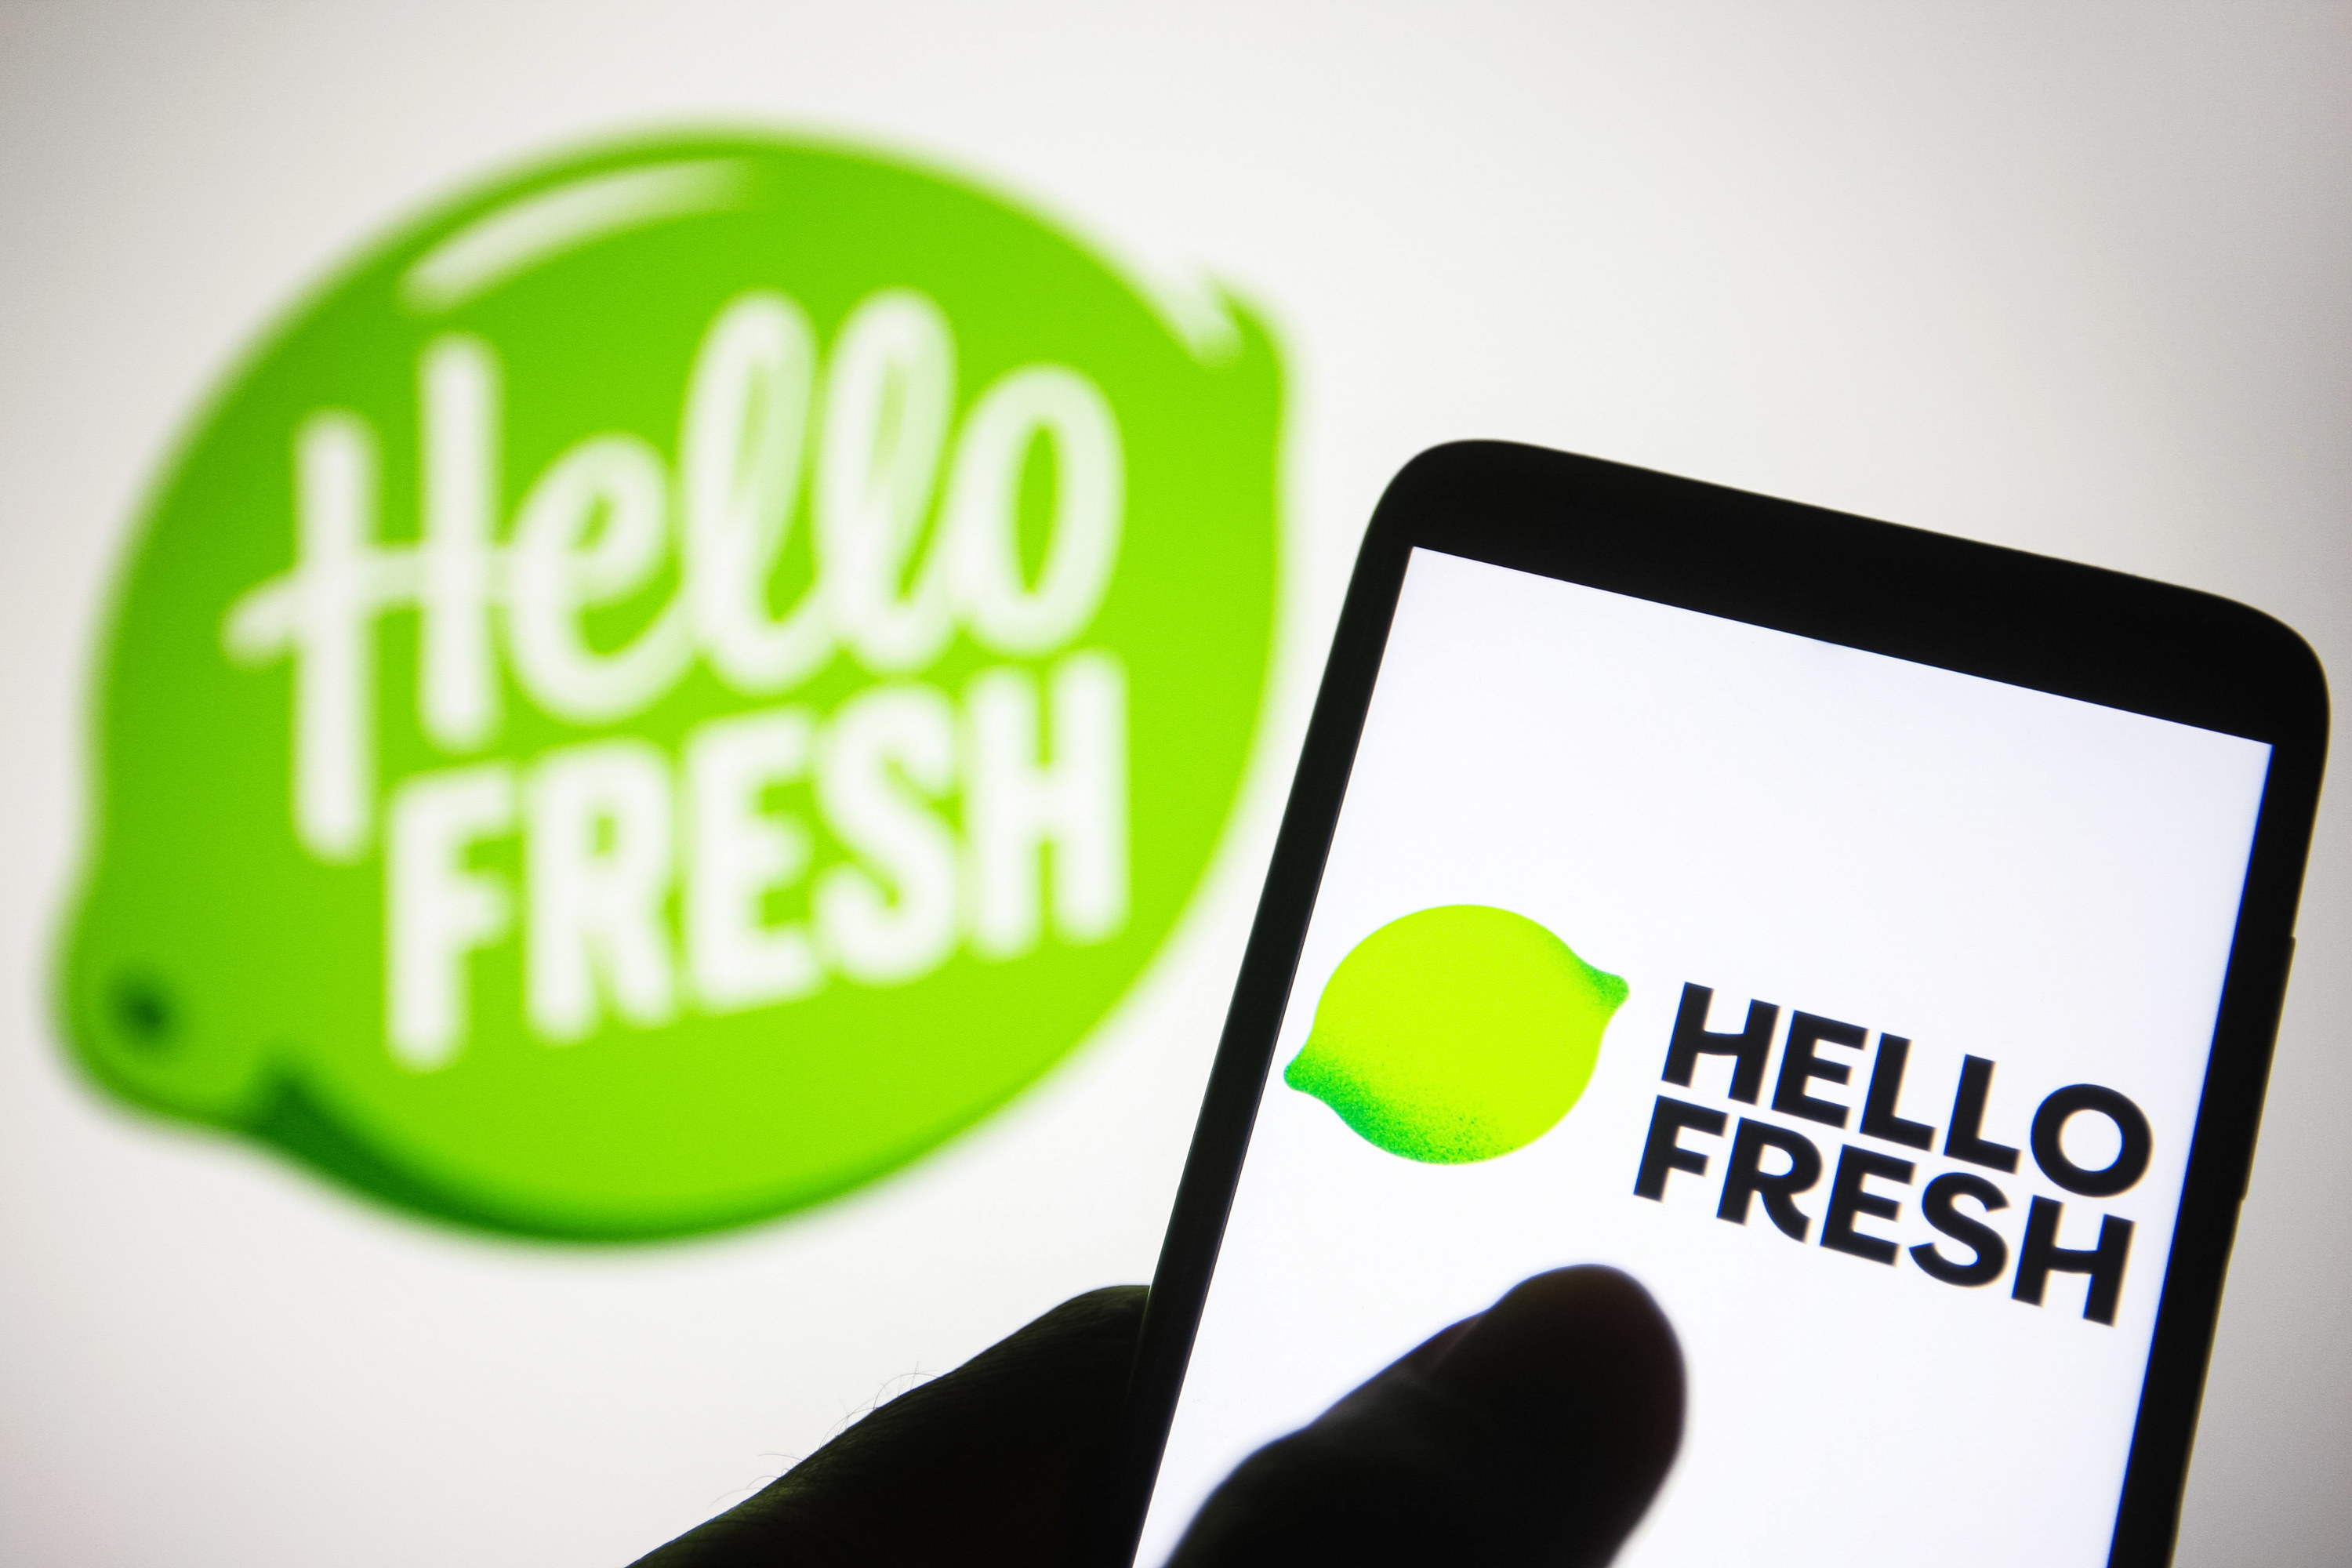 Someone using the HelloFresh app on their phone, near a wall with the HelloFresh logo on it